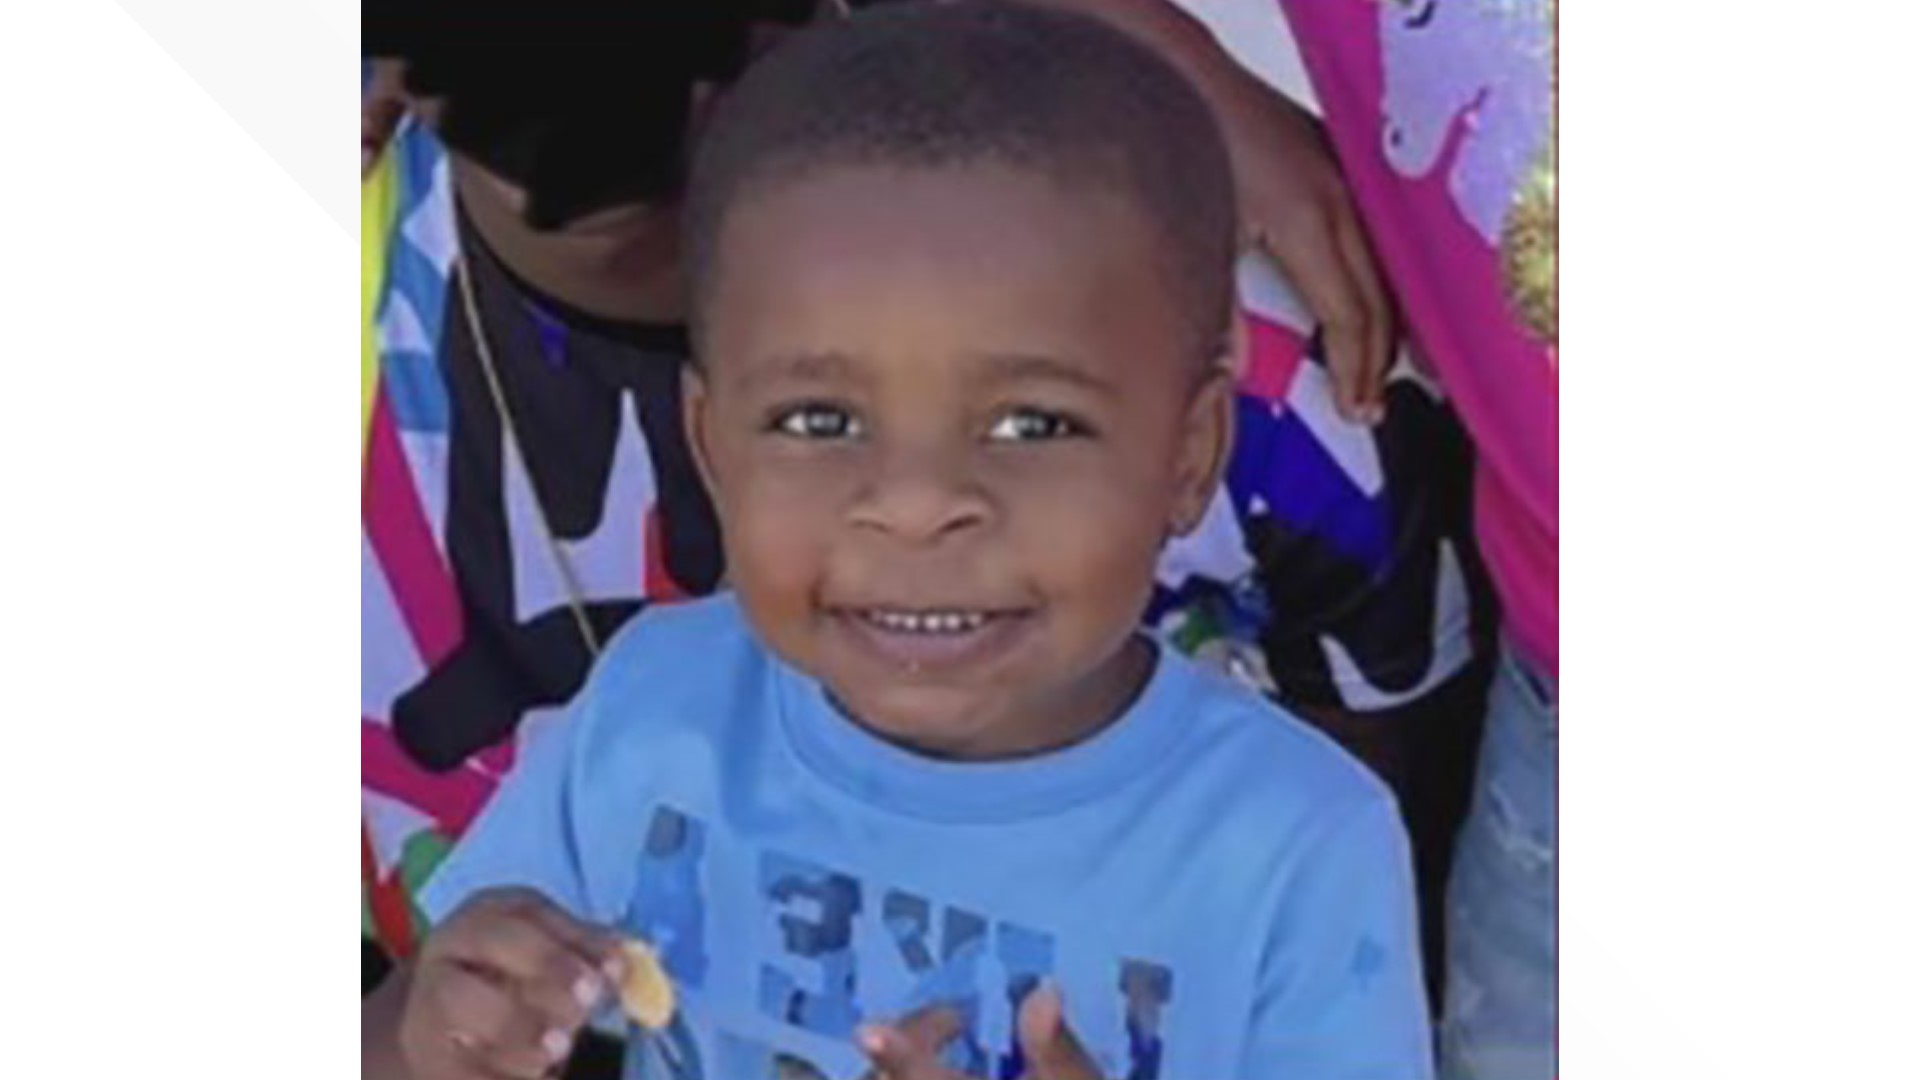 The body of missing two-year-old Ezekiel Harry has been discovered in Houma after the child was reported missing earlier Tuesday.